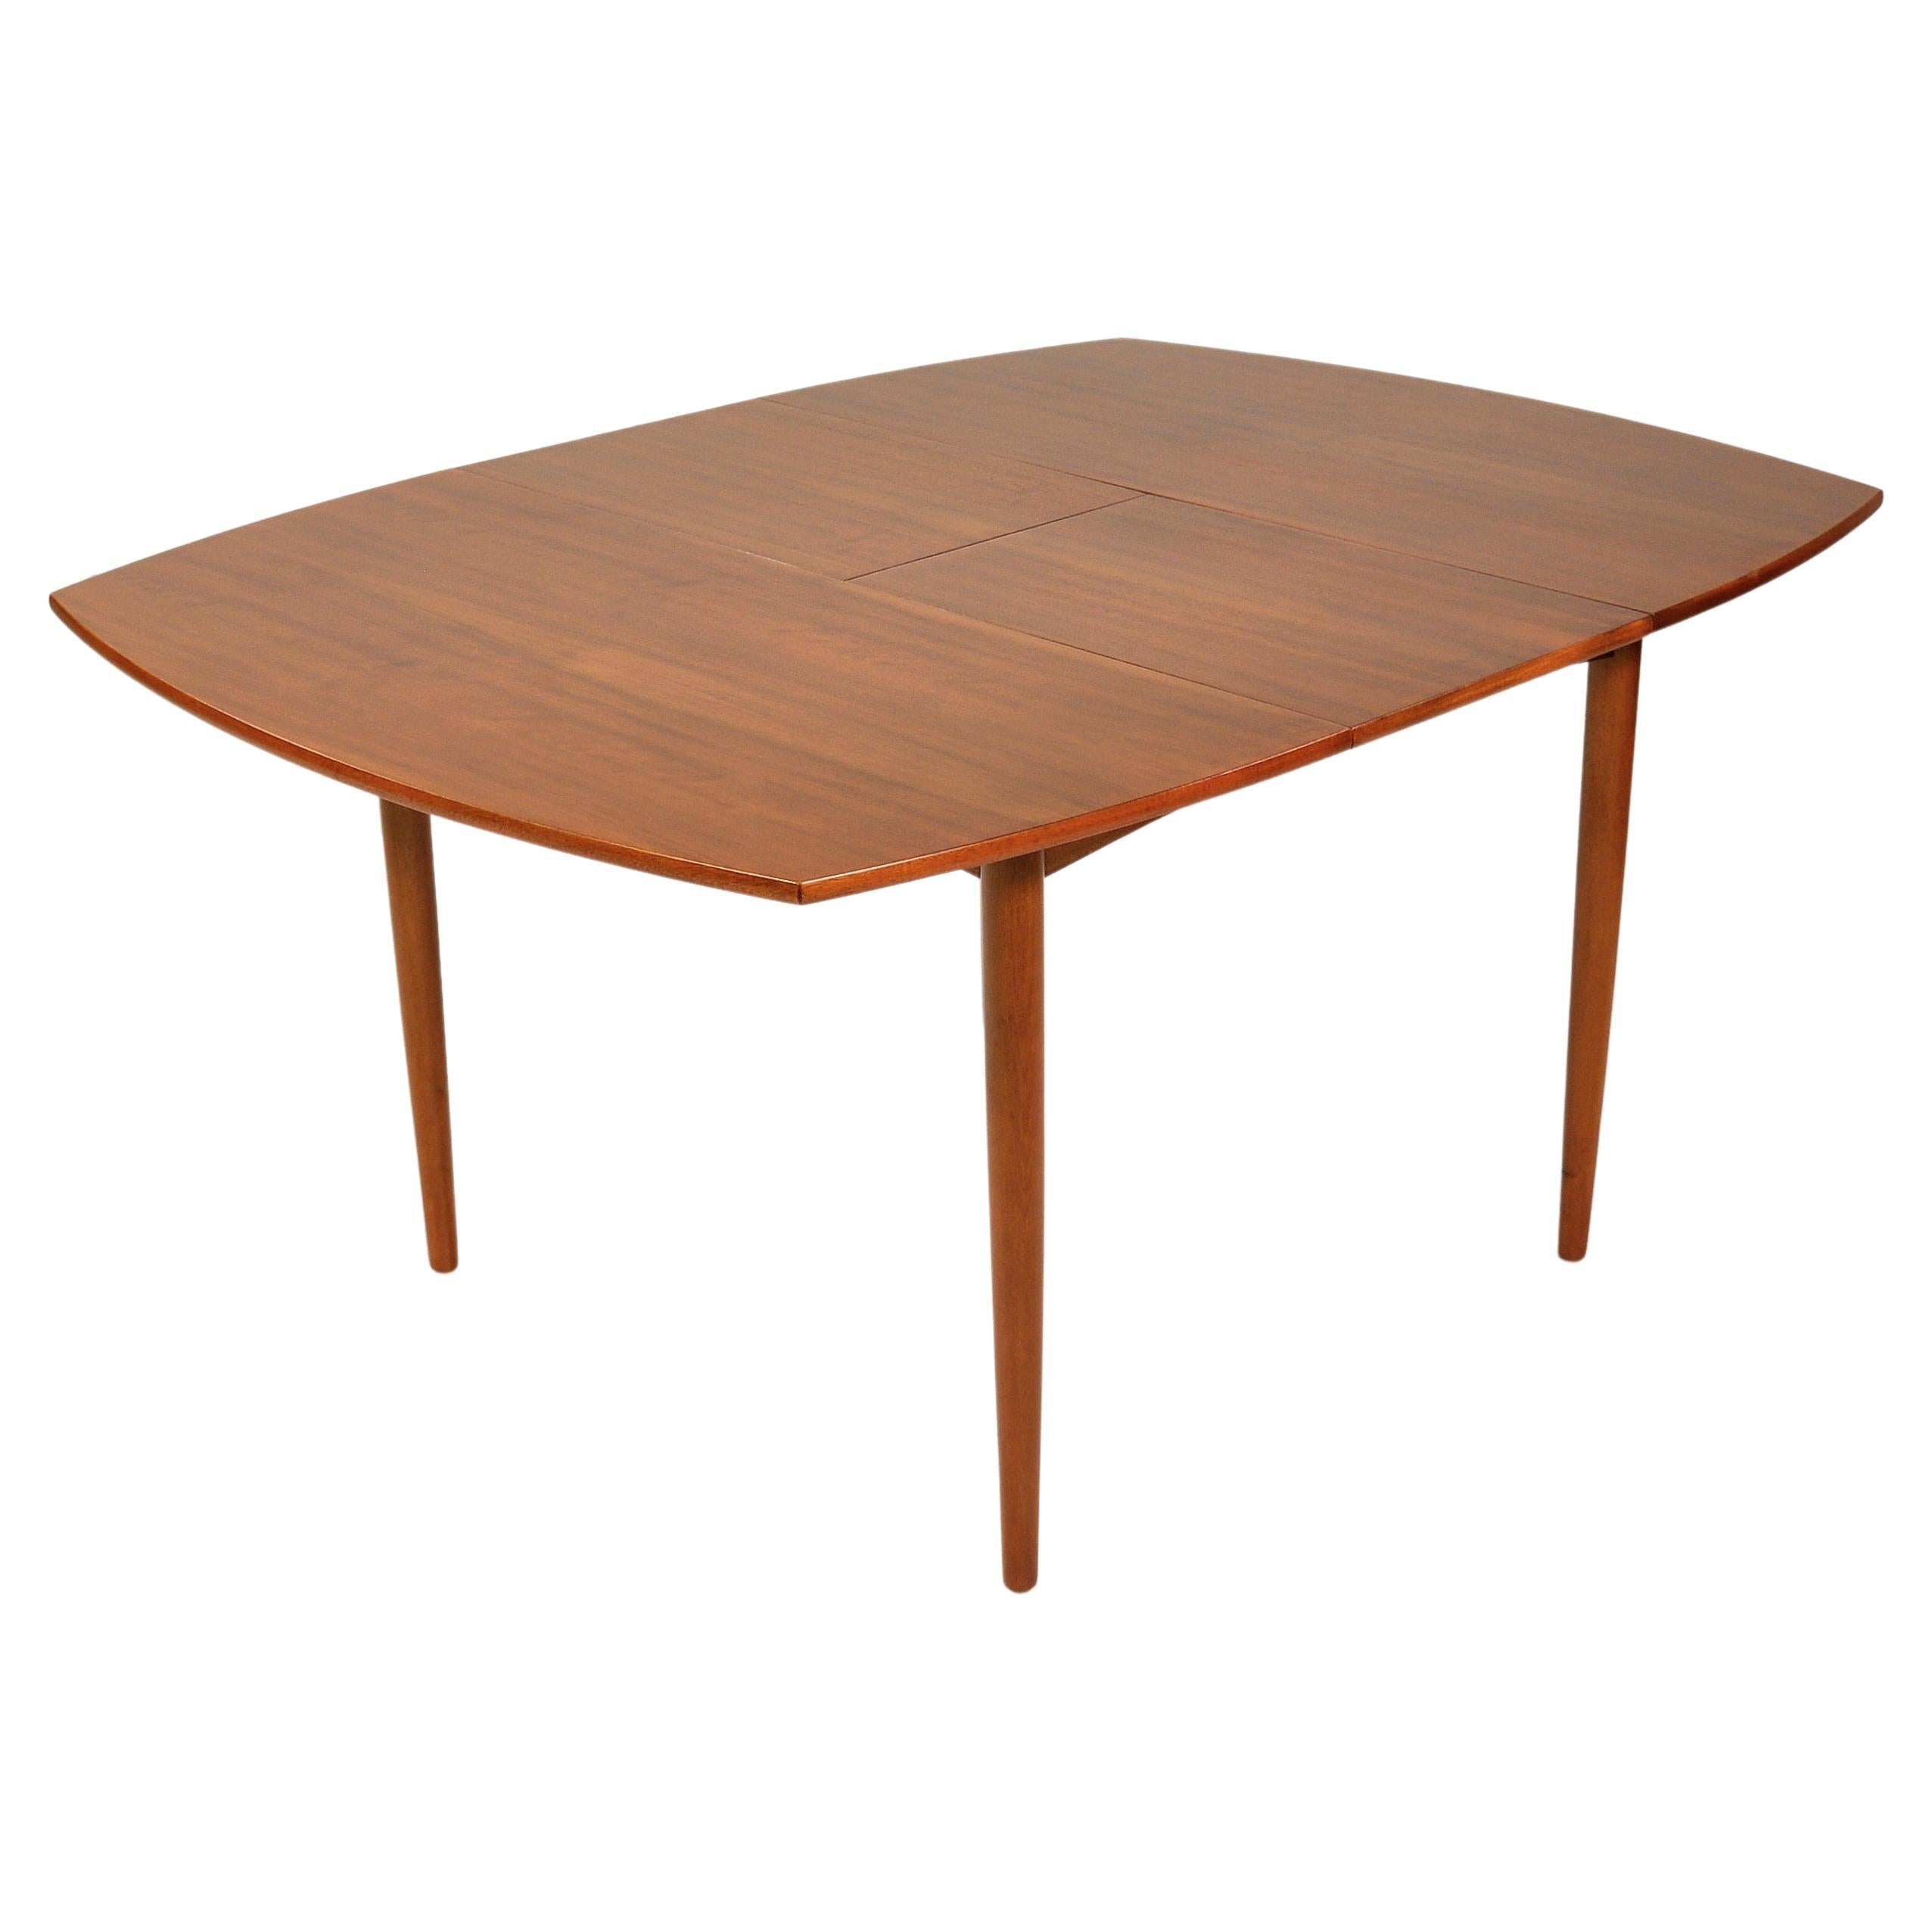 Gorgeous mid-century Scandinavian Modern teak dining table, designed by Arne Hovmand Olsen in the 1960s for Mogens Kold Møbelfabrik. The table seats four when compact and extends to accommodate six for a larger dinner party. The clean lines of the